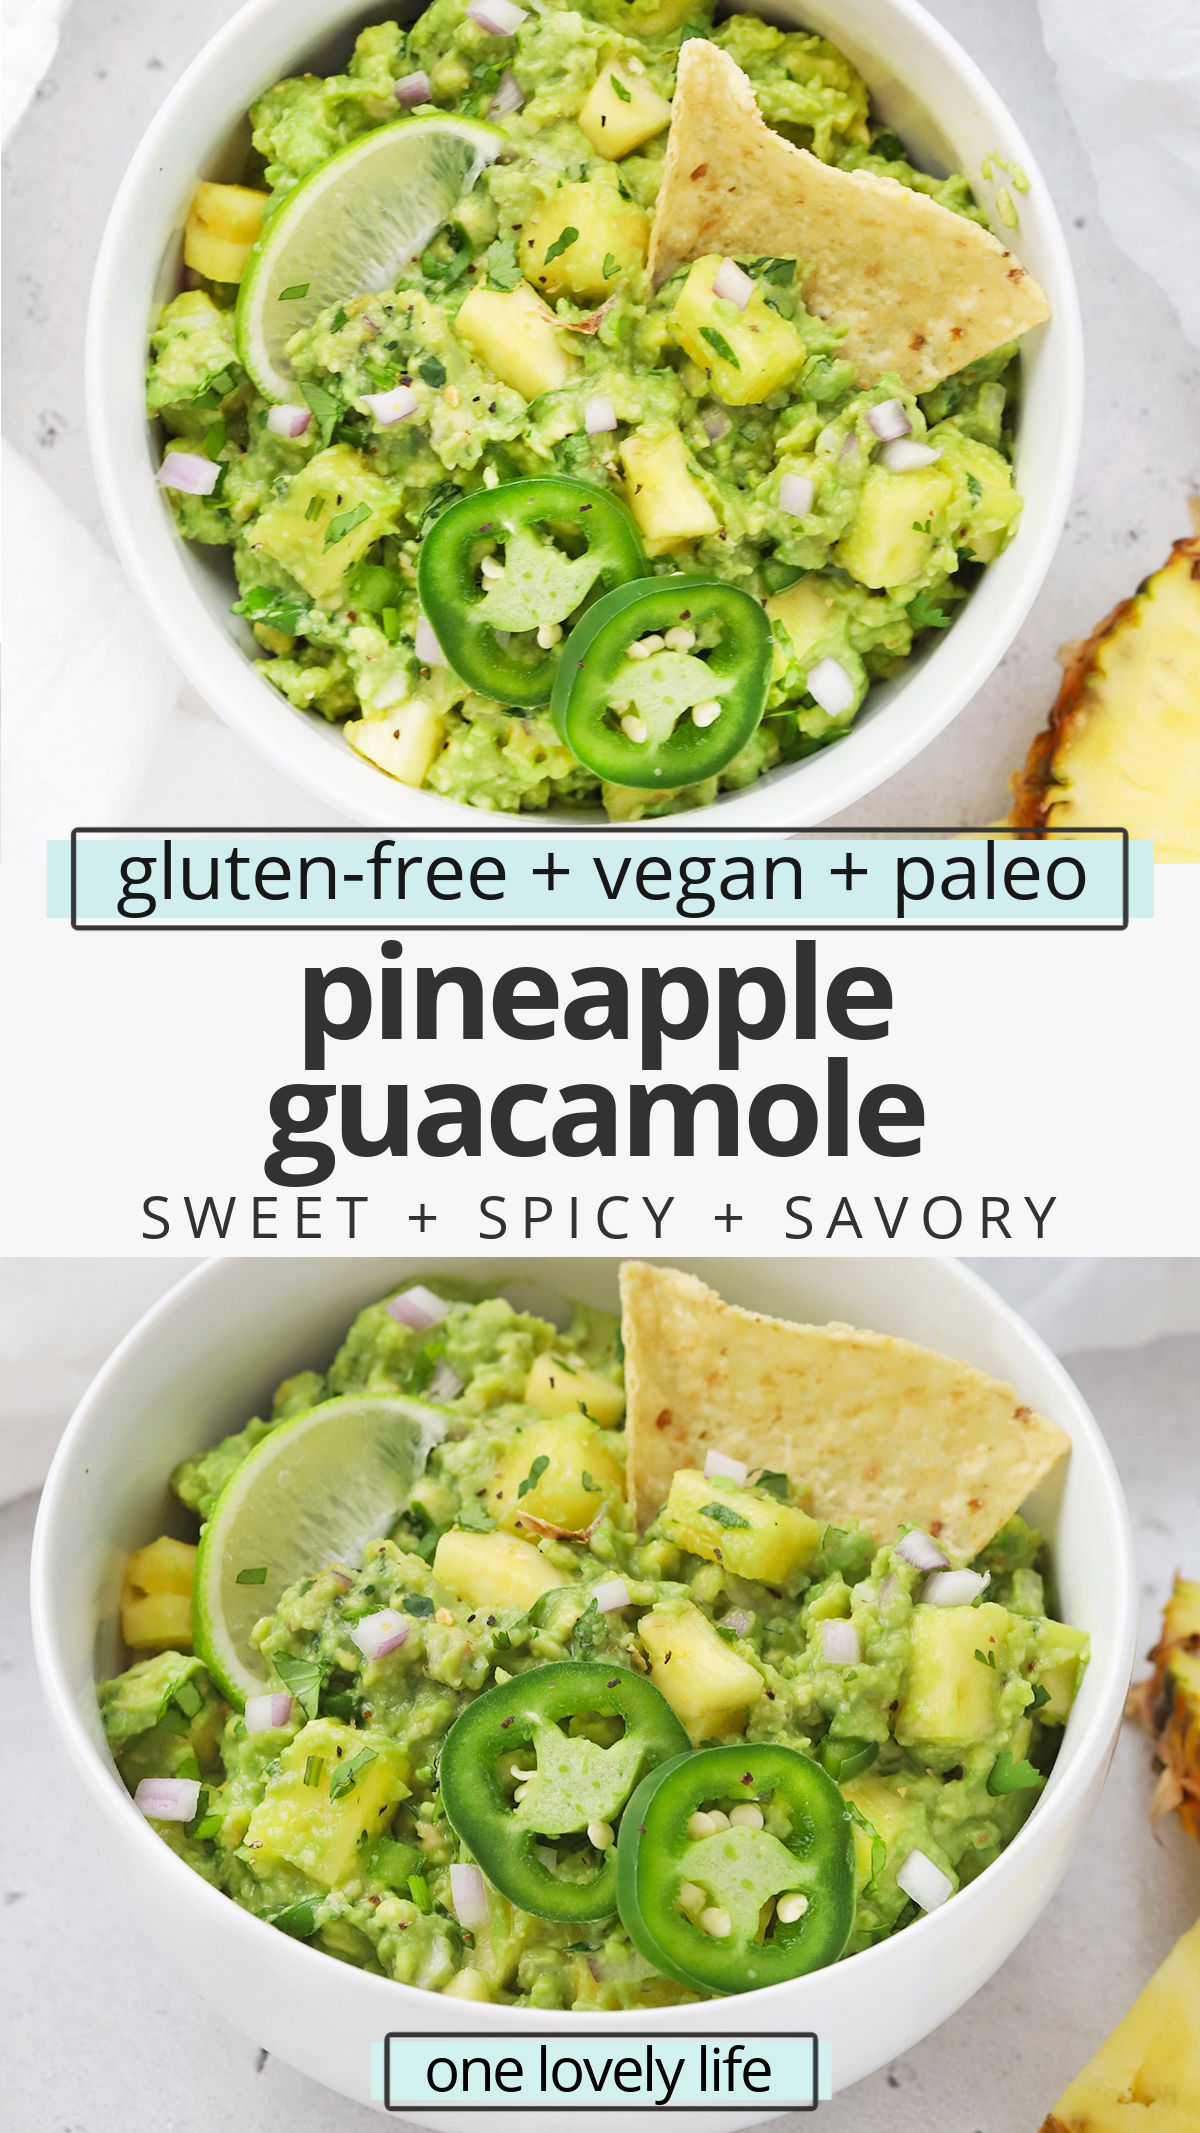 Pineapple Guacamole - Your favorite classic guacamole with a tropical twist! This sweet and spicy guacamole is delicious with all your Tex-Mex faves. Try all our ways to enjoy it below! (Gluten-Free, Paleo, Vegan) // Pineapple guacamole recipe // cinco de mayo // healthy appetizer #guacamole #healthyappetizer #appetizer #glutenfree #pineapple #paleo #vegan #whole30